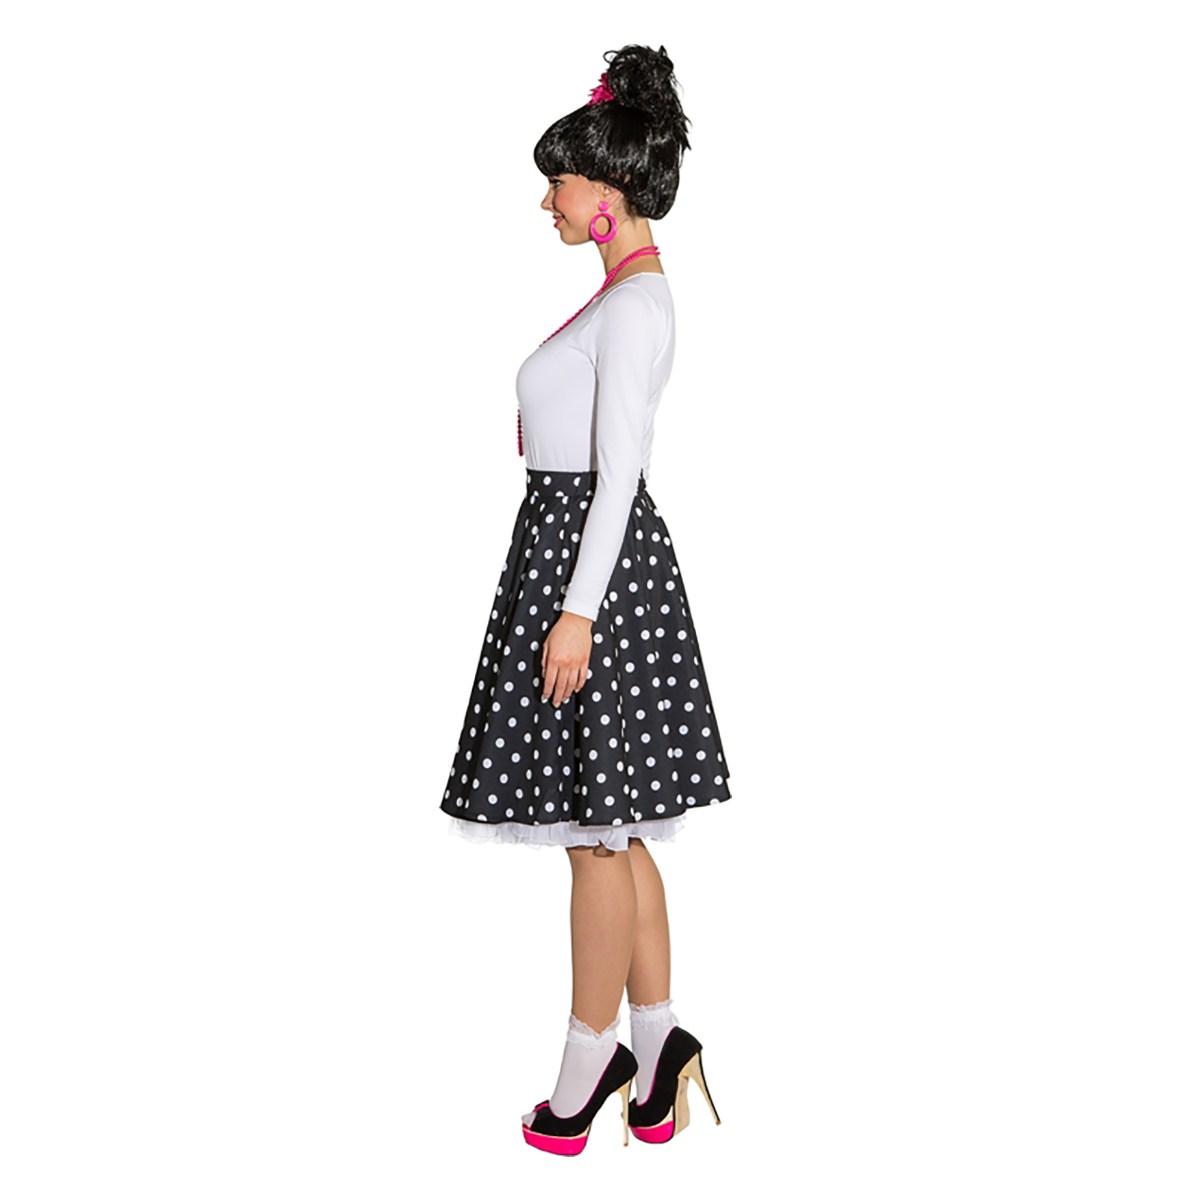 Gonna Pin Up Anni 50/60 Nera a Pois con Sottoveste